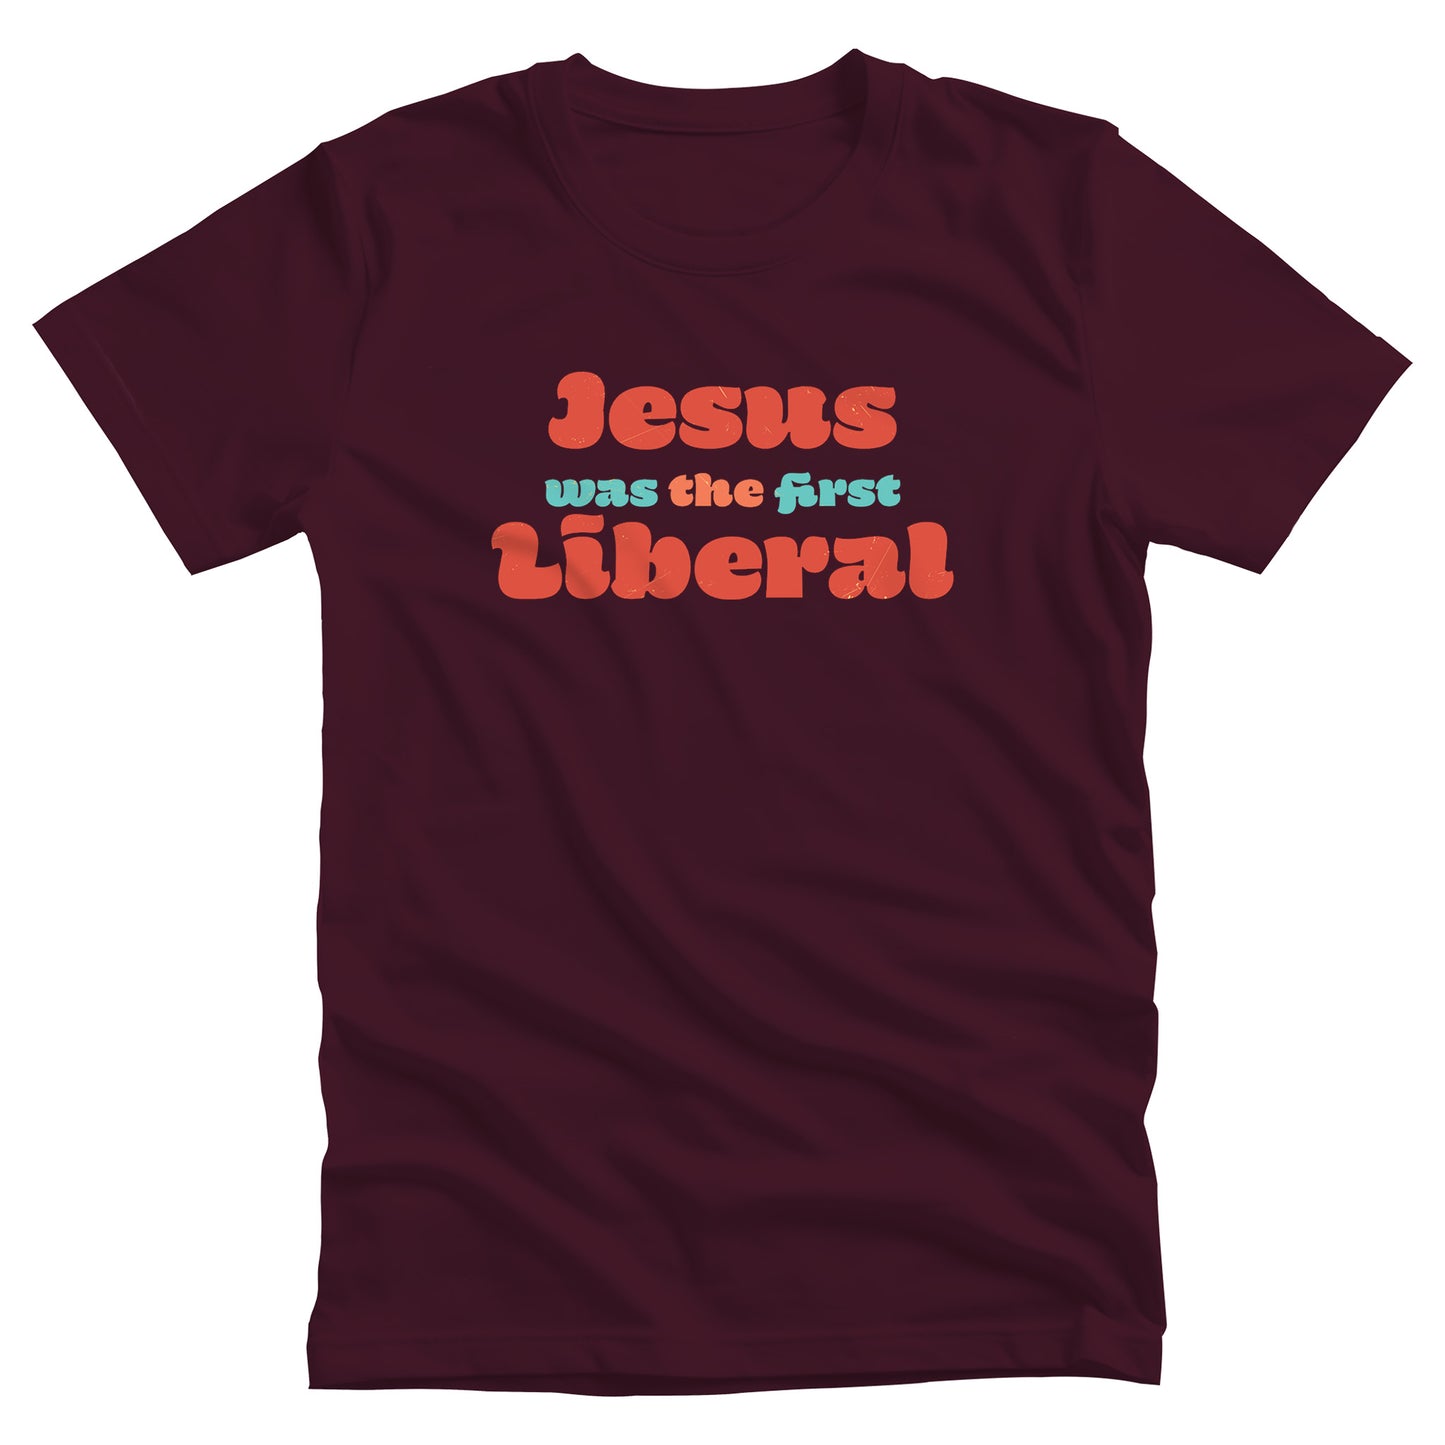 Maroon unisex t-shirt that says, “Jesus was the first Liberal.” The words “Jesus”, “the”, and “Liberal” are all a shade of orange, and the words “Was” and “First” are a light blue-green.